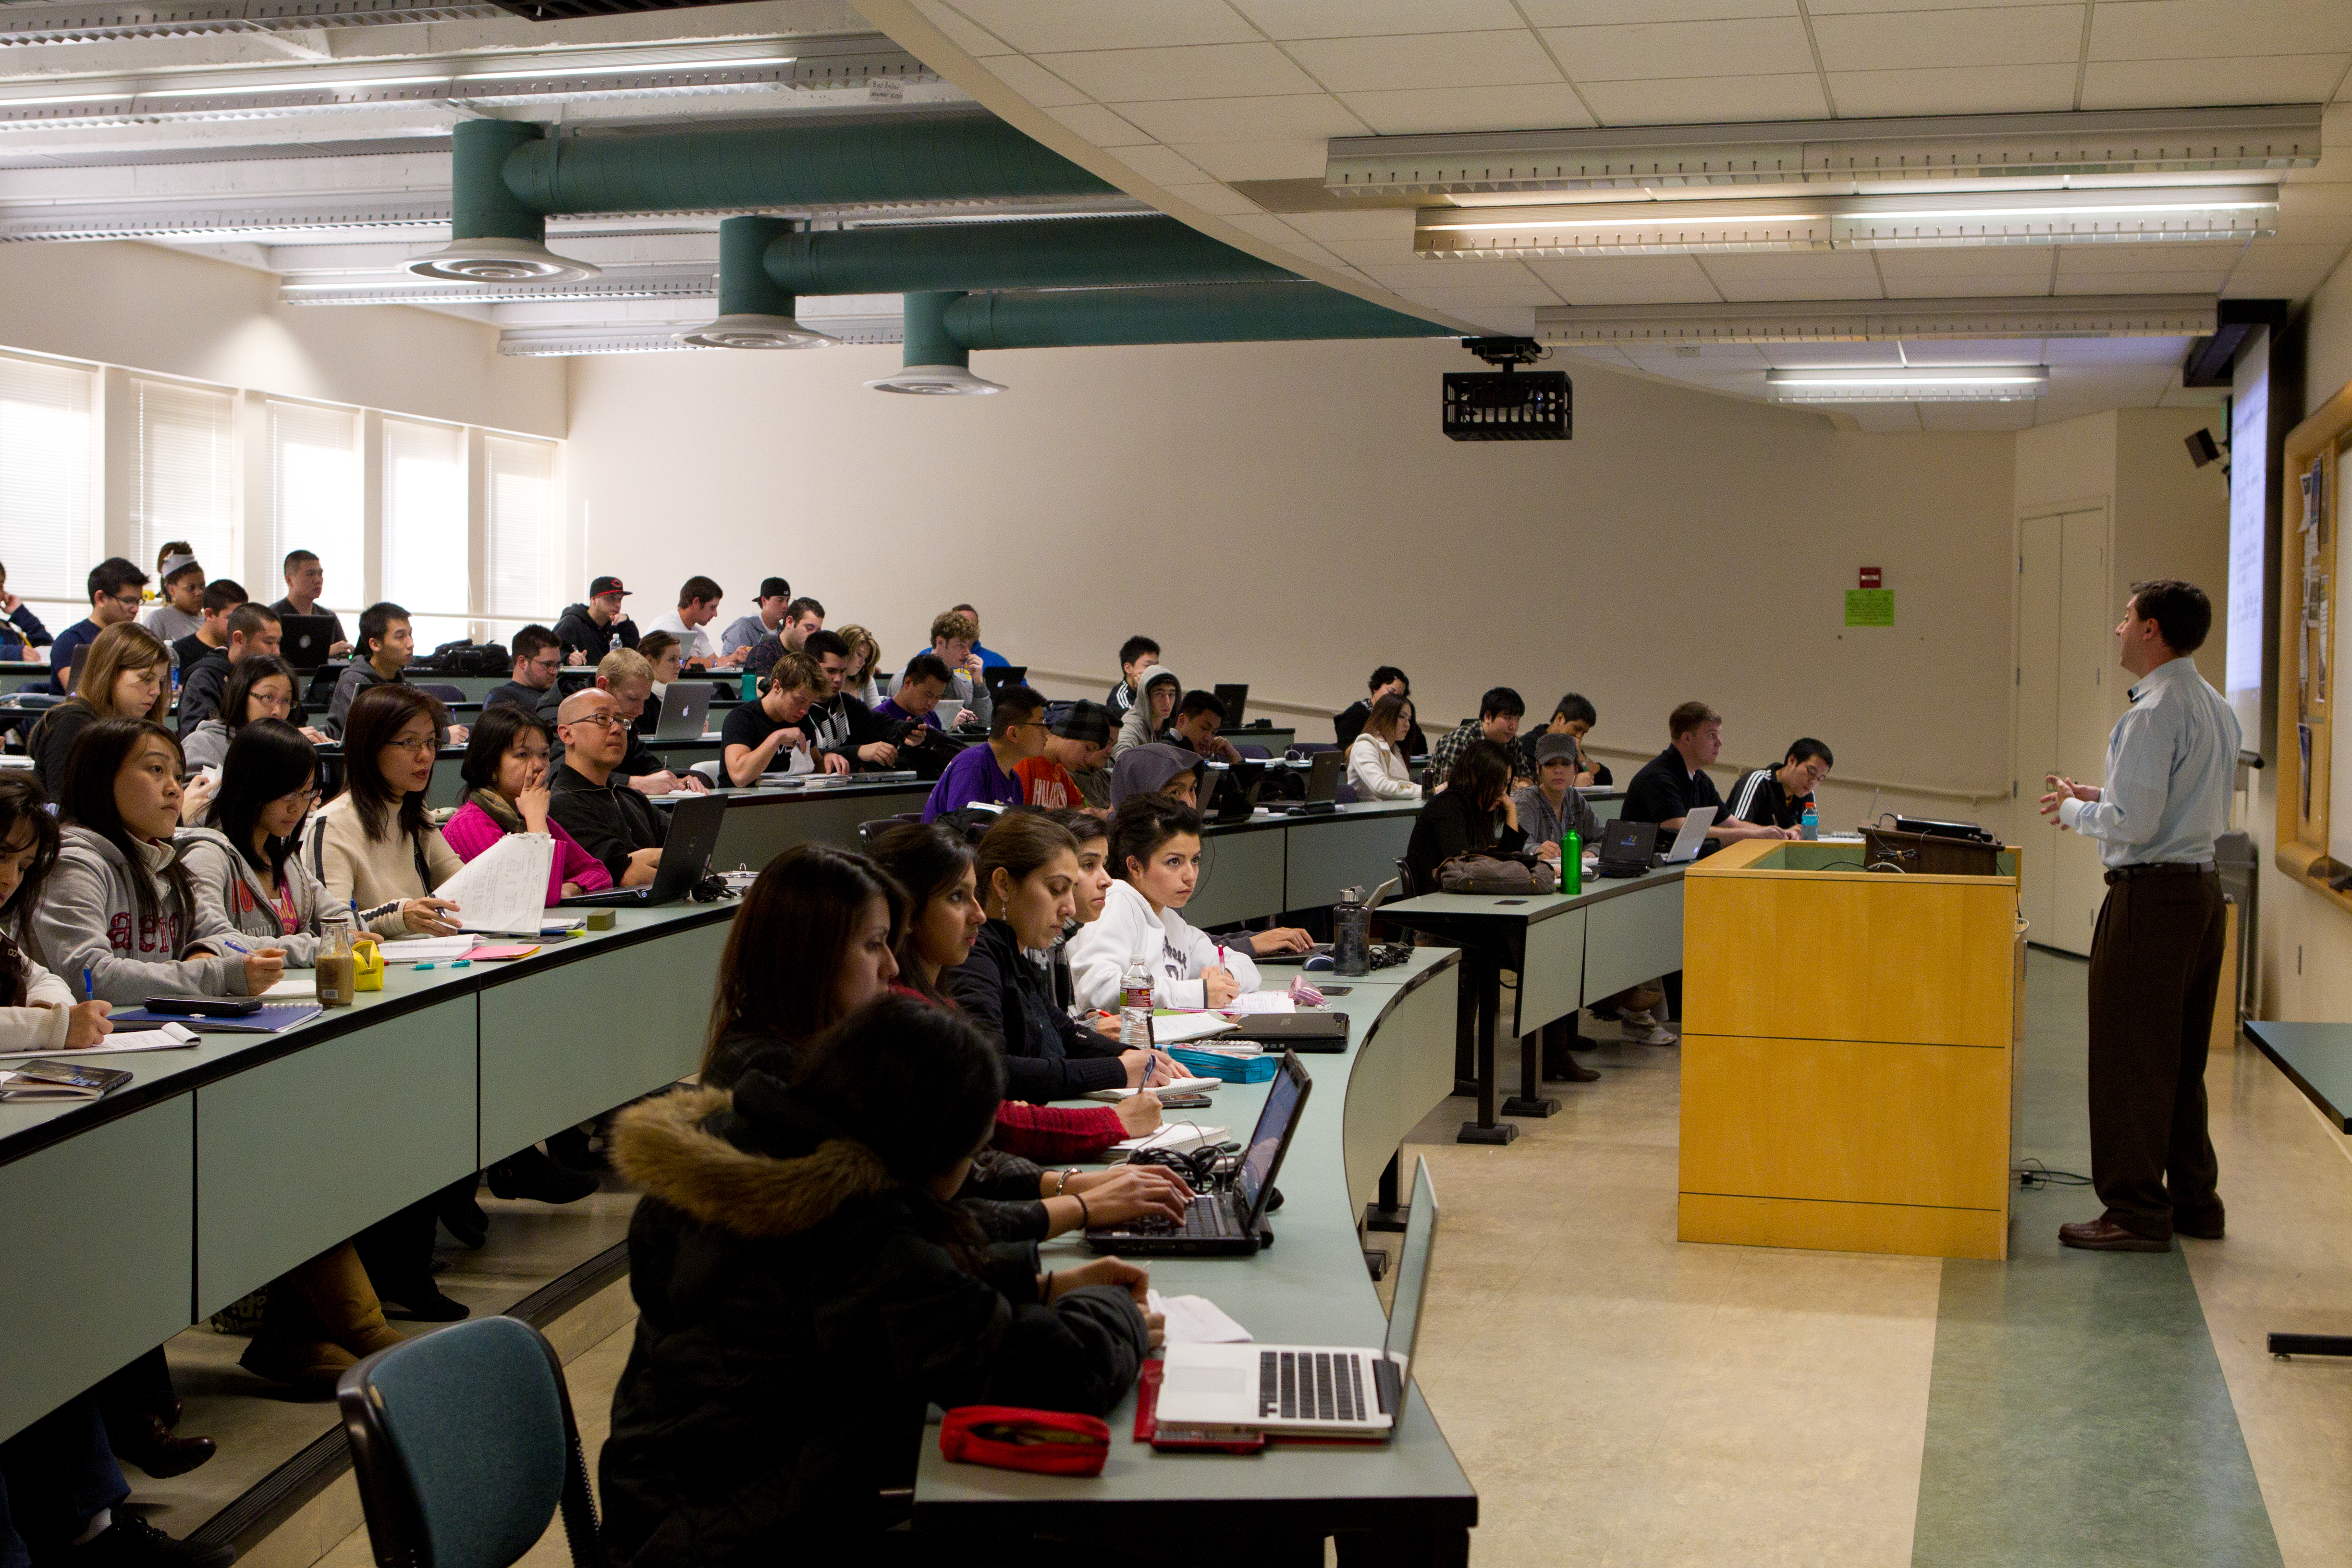 A large lecture hall with students taking notes on laptops paying attention to their expert professor.